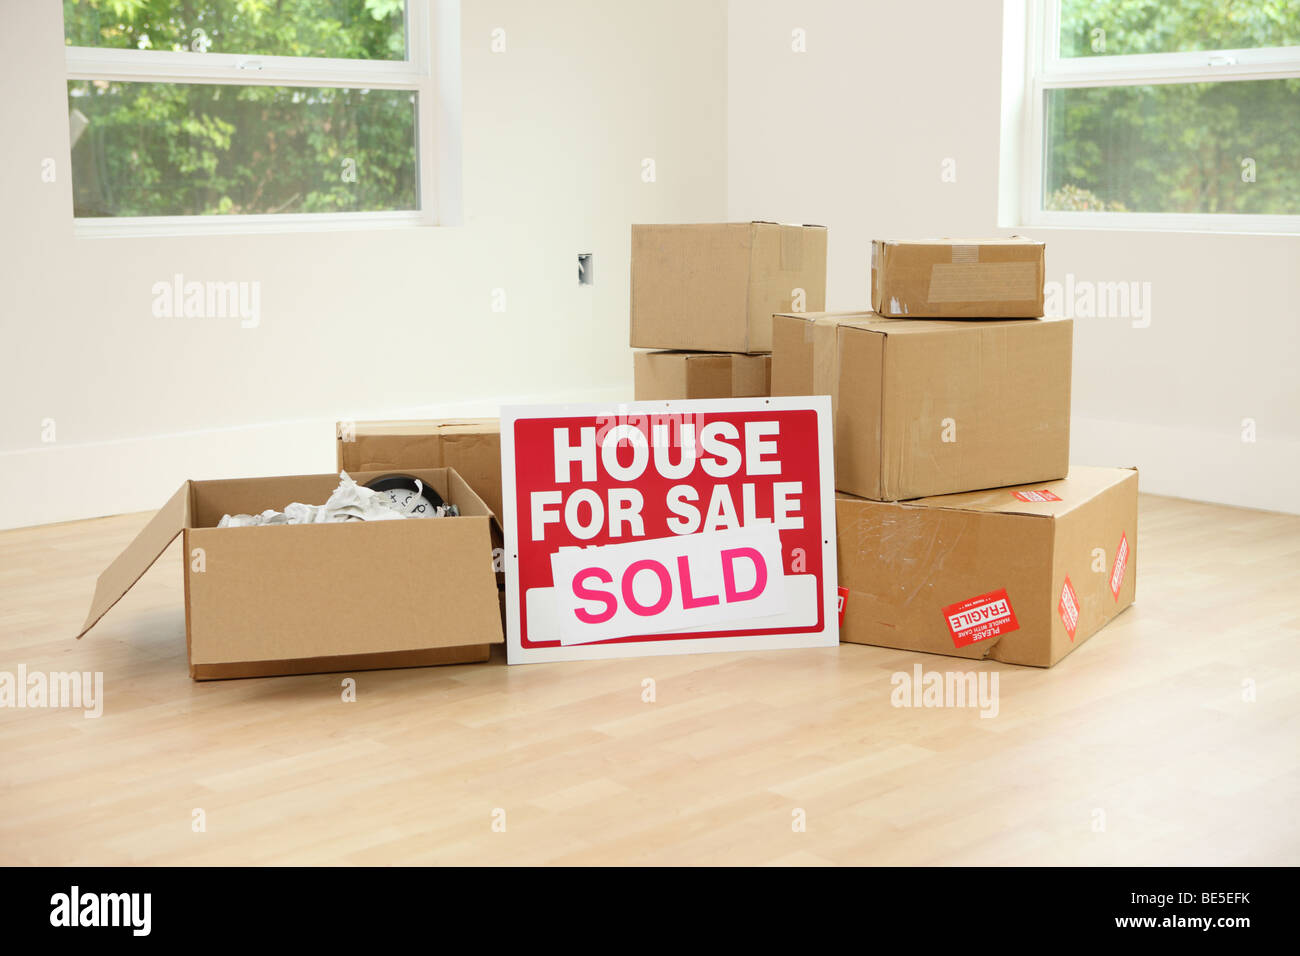 Cardboard boxes and real estate sign Stock Photo